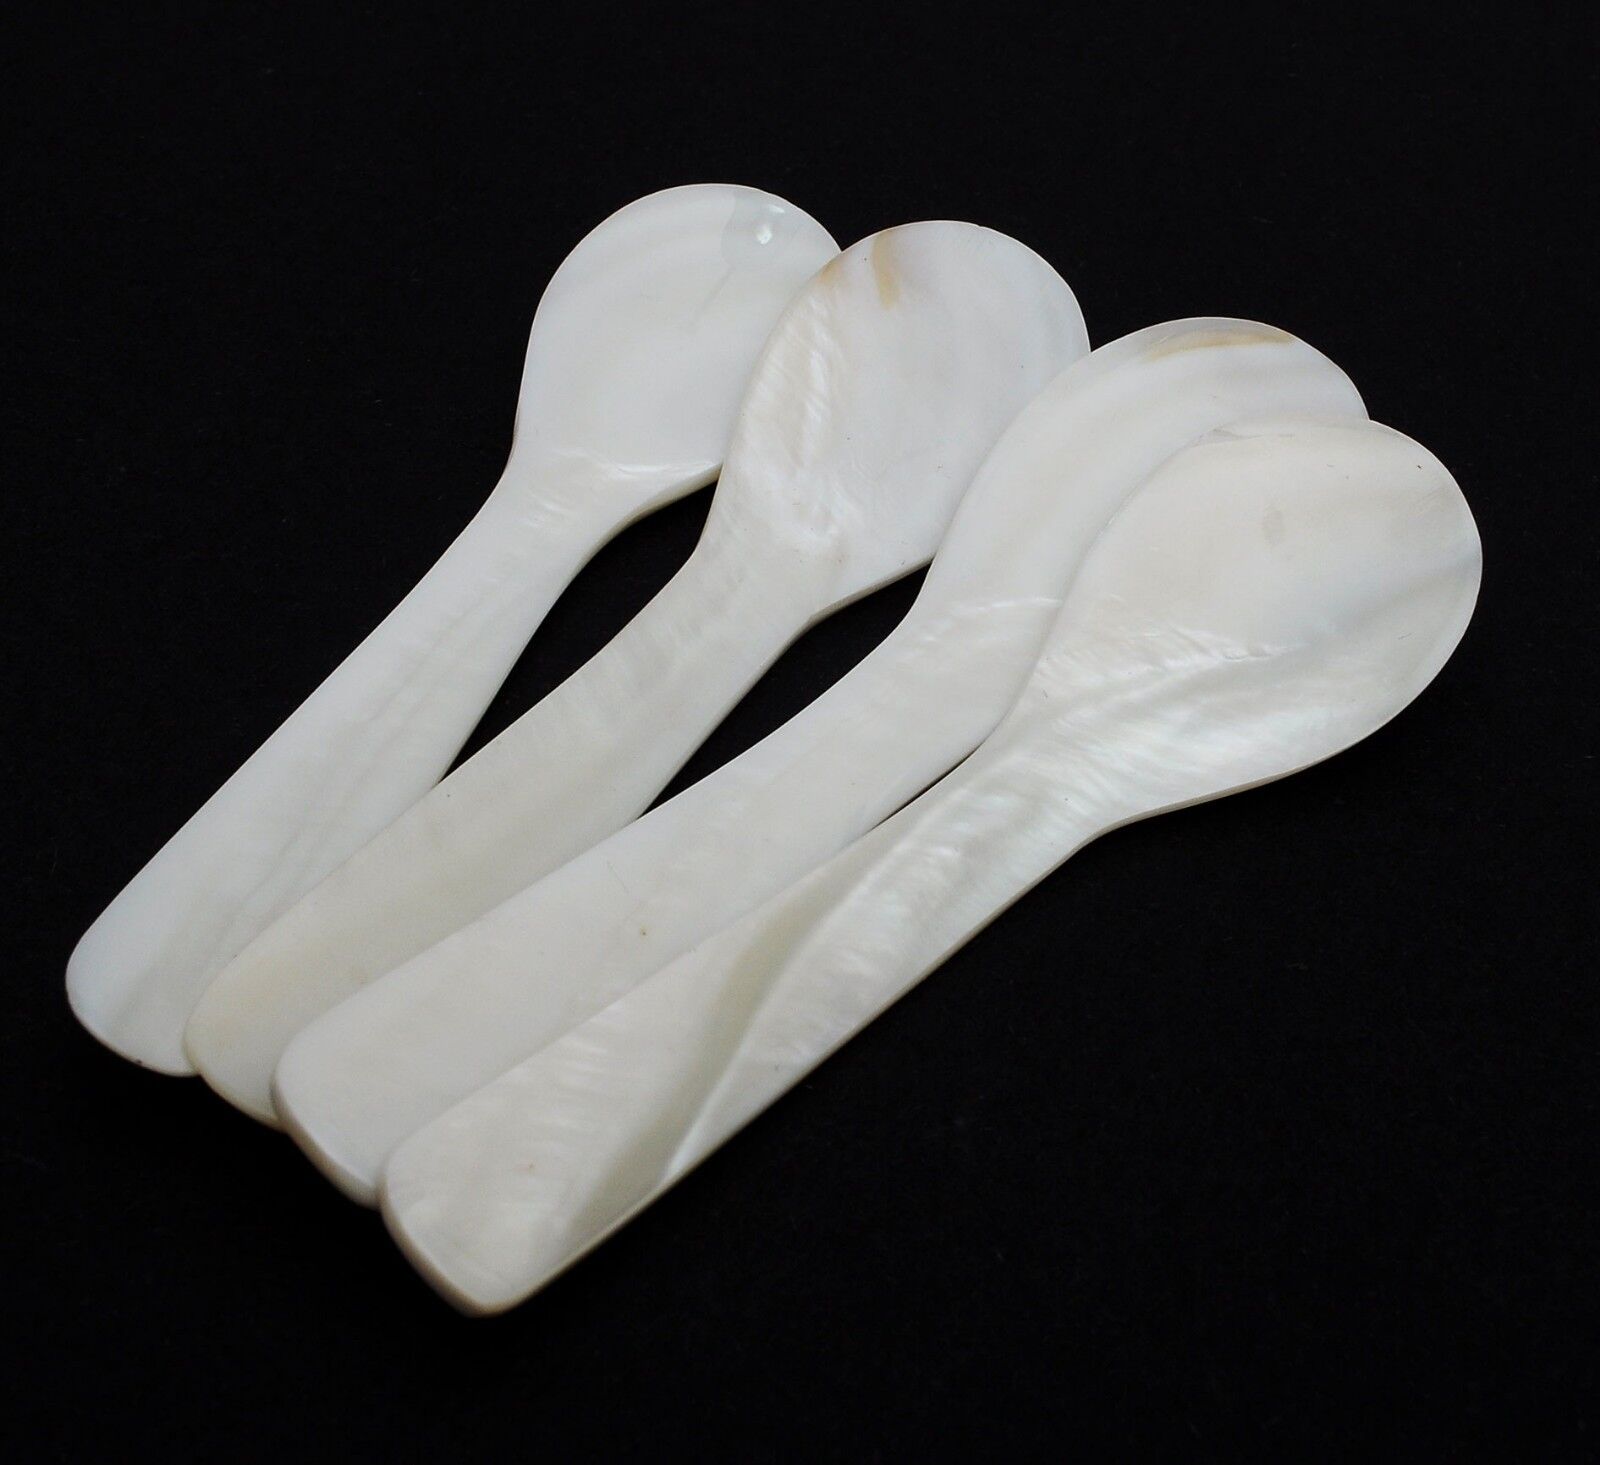 4 Small Mother of Pearl Spoons MOP Caviar Egg Shell Serving Oysters Handmade